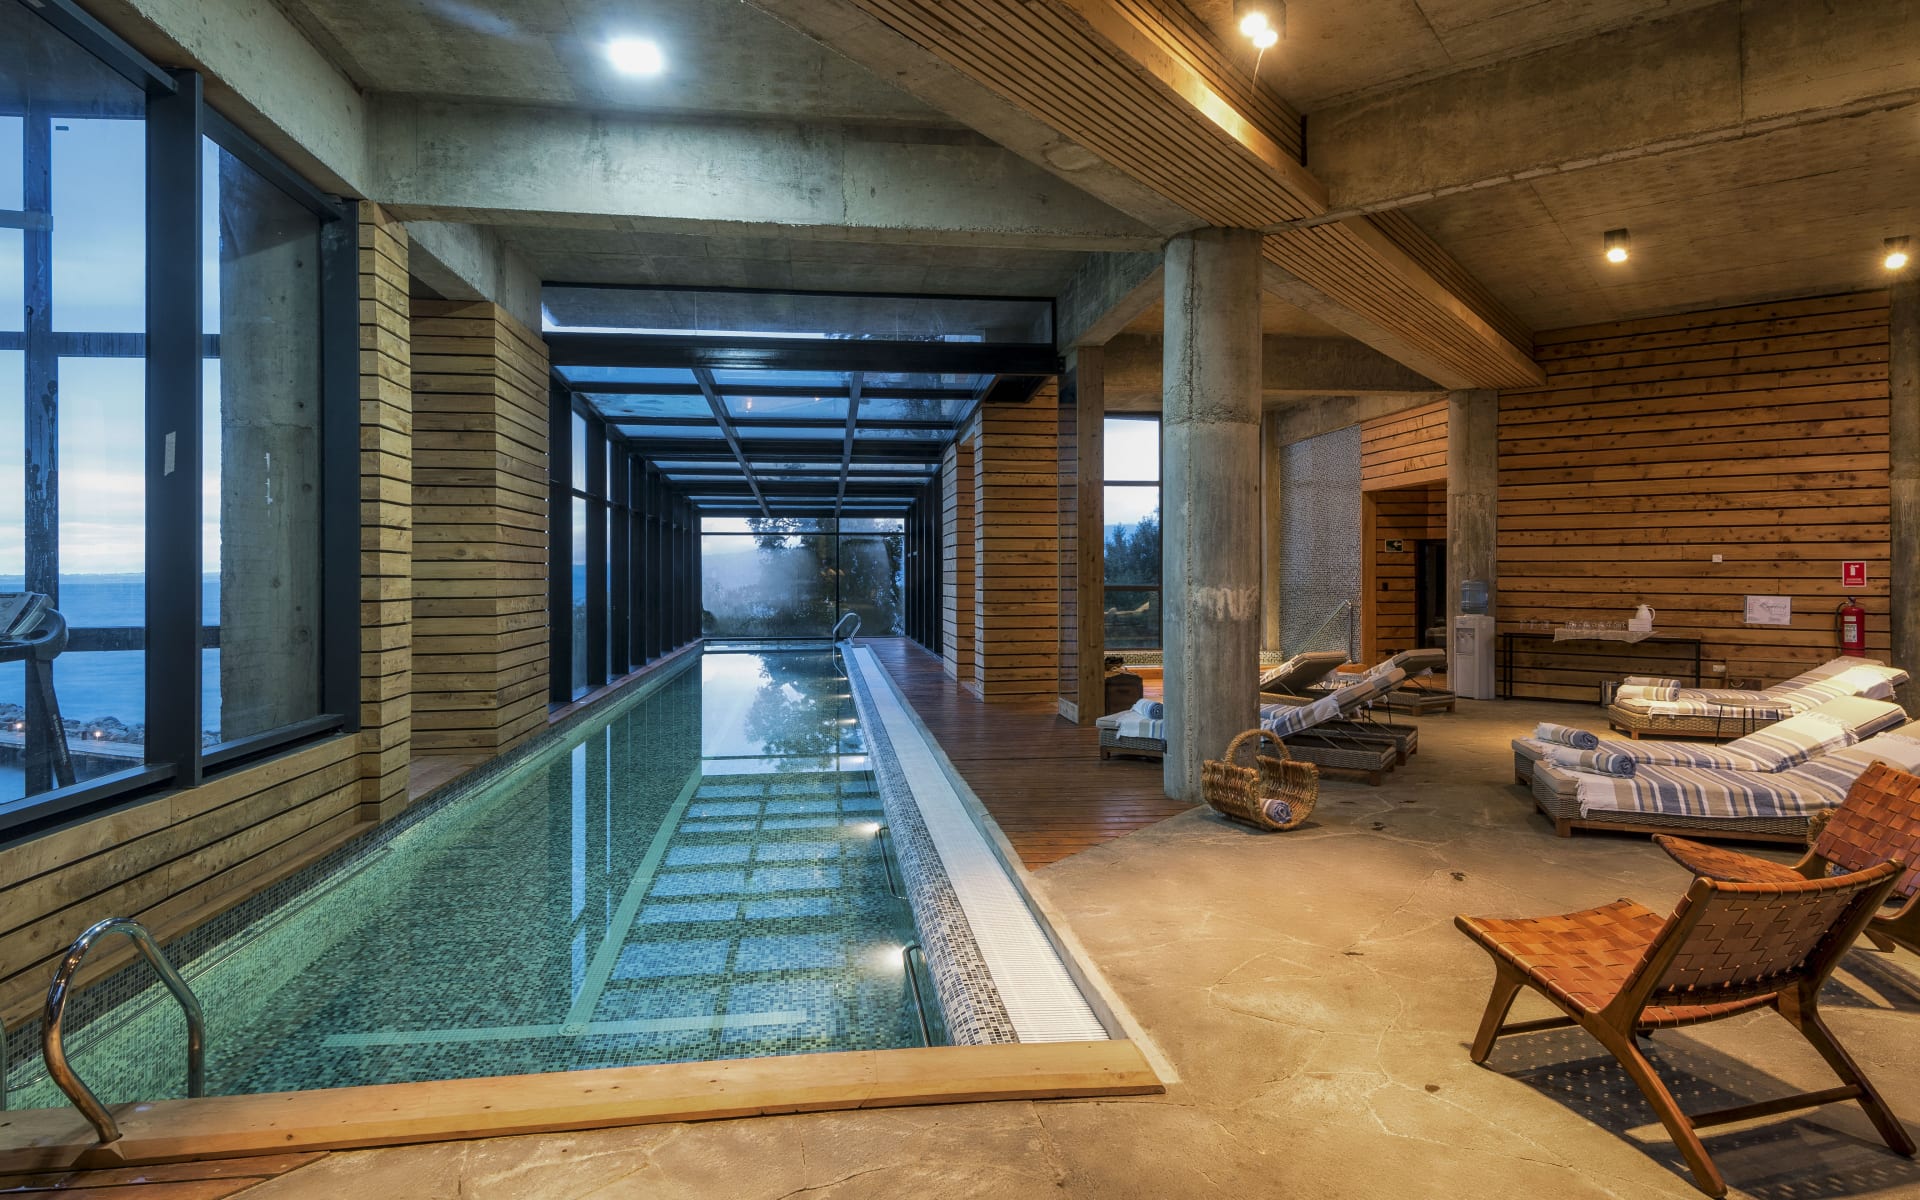 Indoor sun loungers and a swimming pool comprise the spa at Hotel AWA.